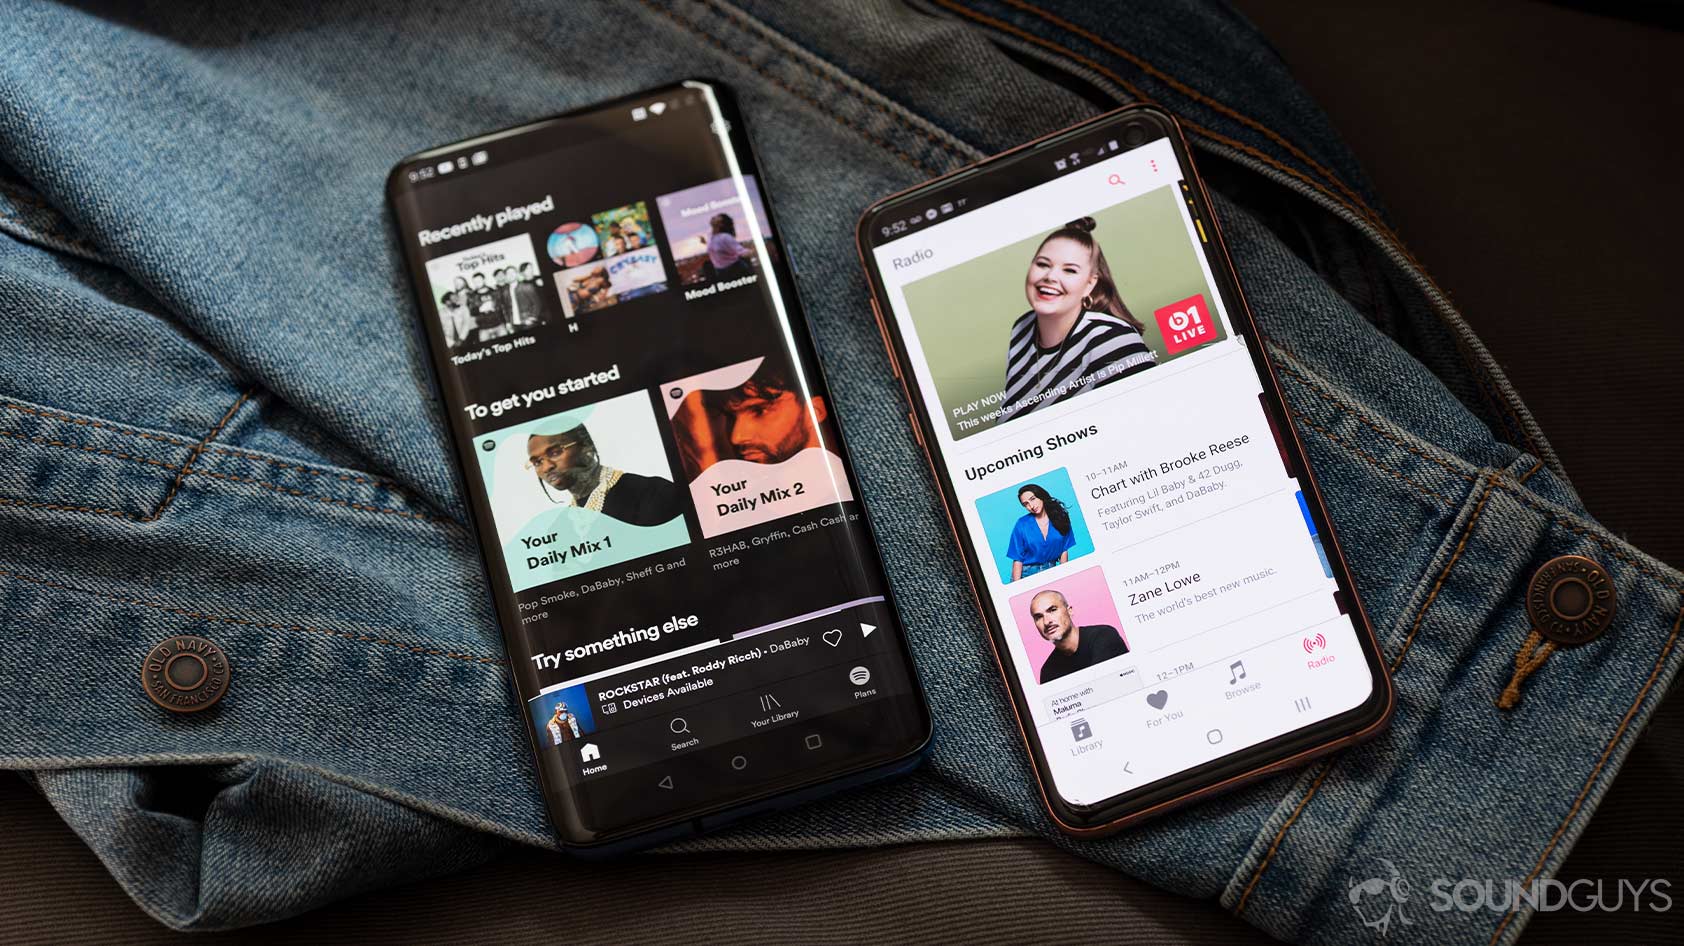 Apple Music vs Spotify on a OnePlus 7 Pro and Samsung Galaxy S10e, respectively.